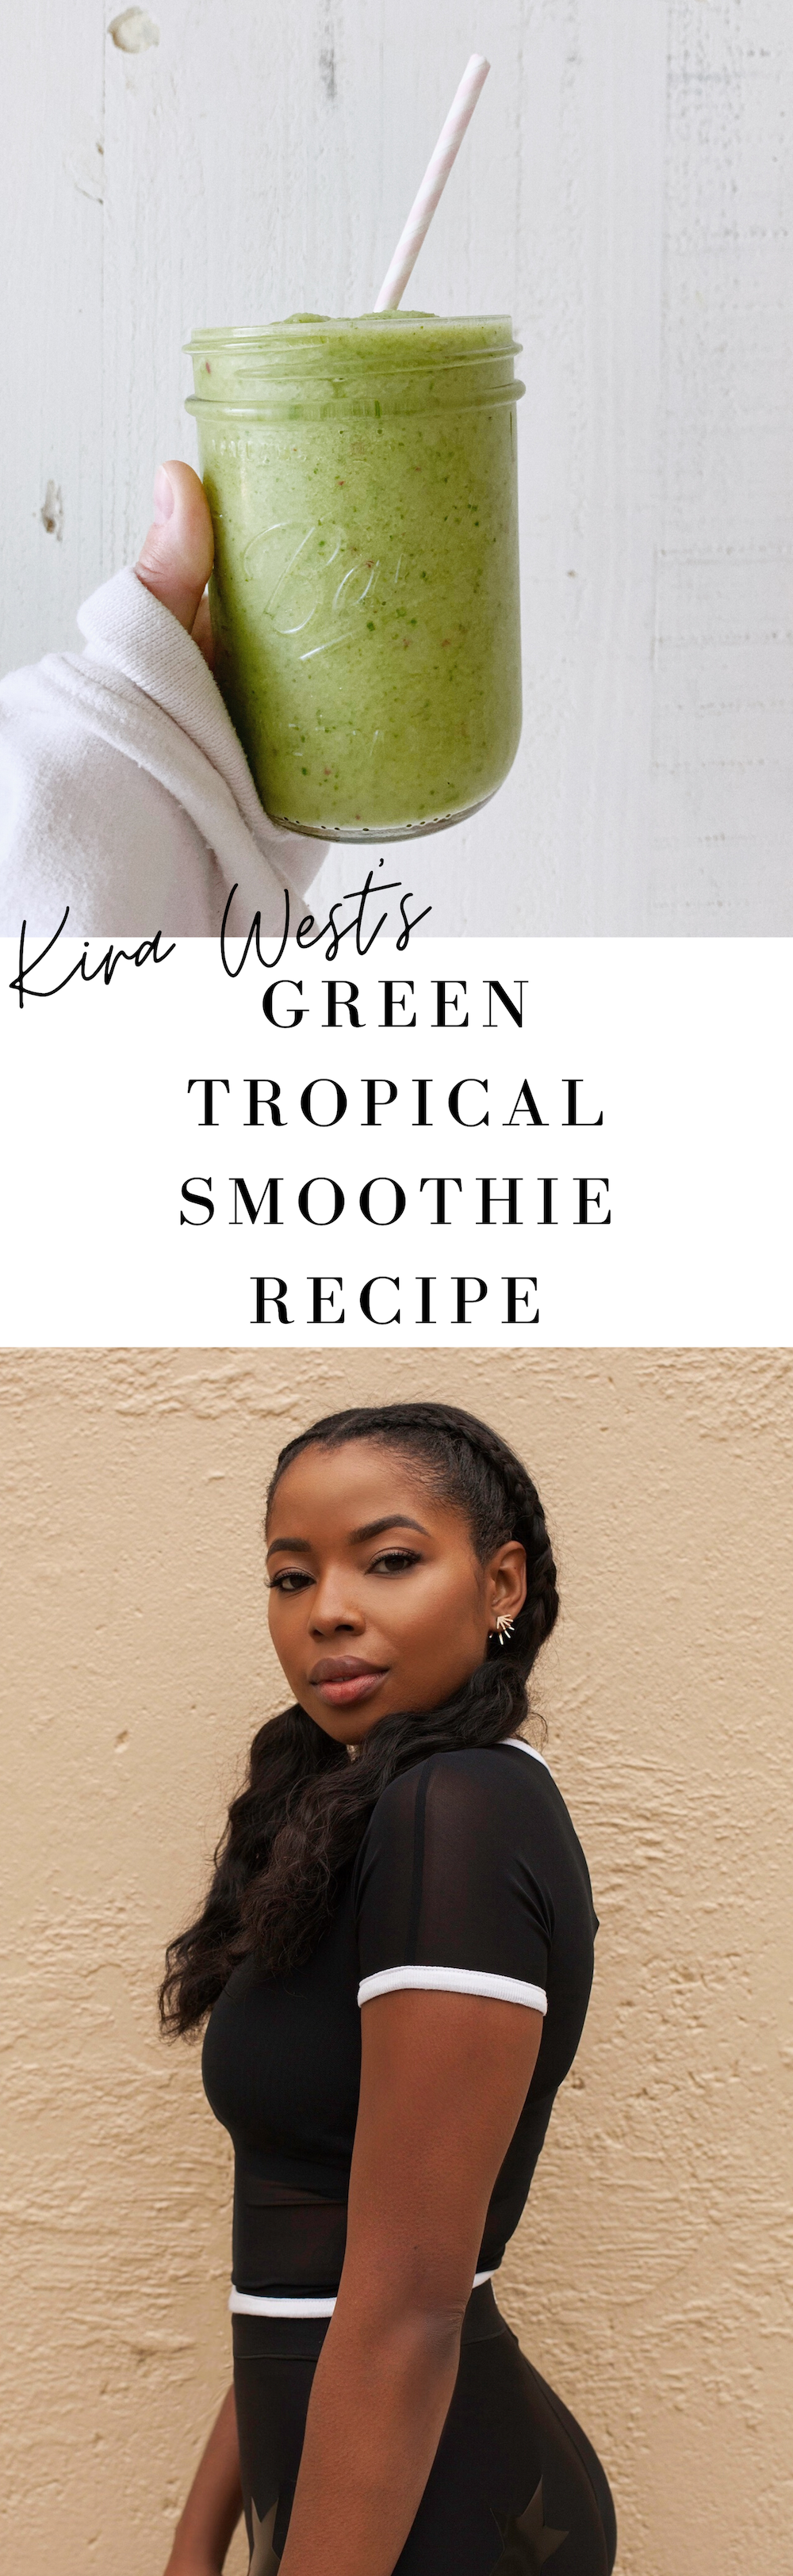 Kira West's Green Tropical Smoothie Recipe